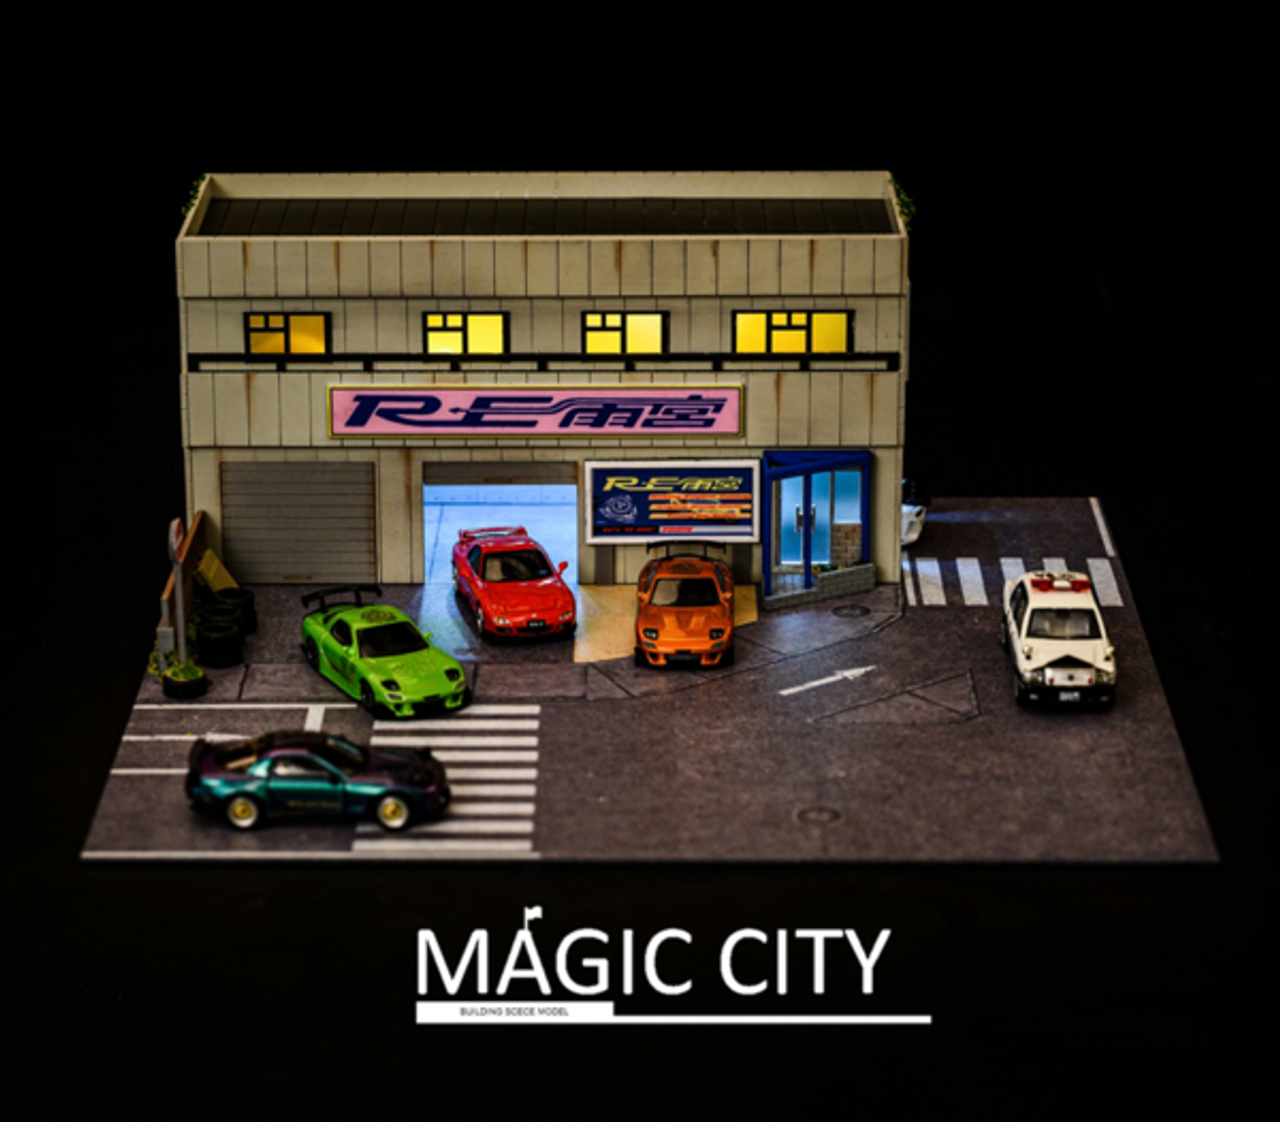 1/64 Magic City Japanese RE Modification Body Shop Diorama (car models NOT included)